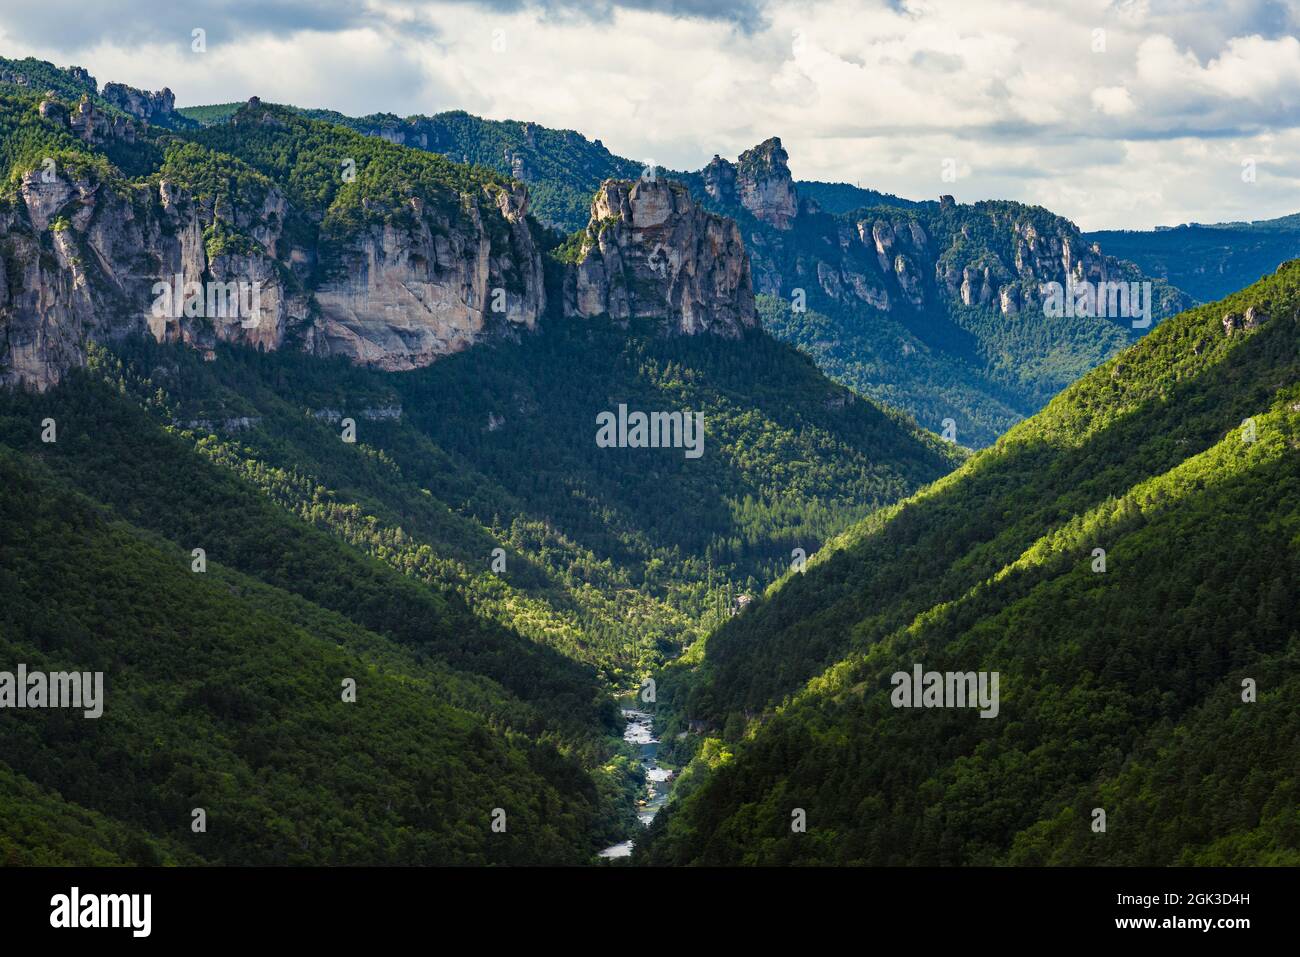 The gorges of the river Tarn. Elevated view of a pure natural landscape in the south of France. Stock Photo